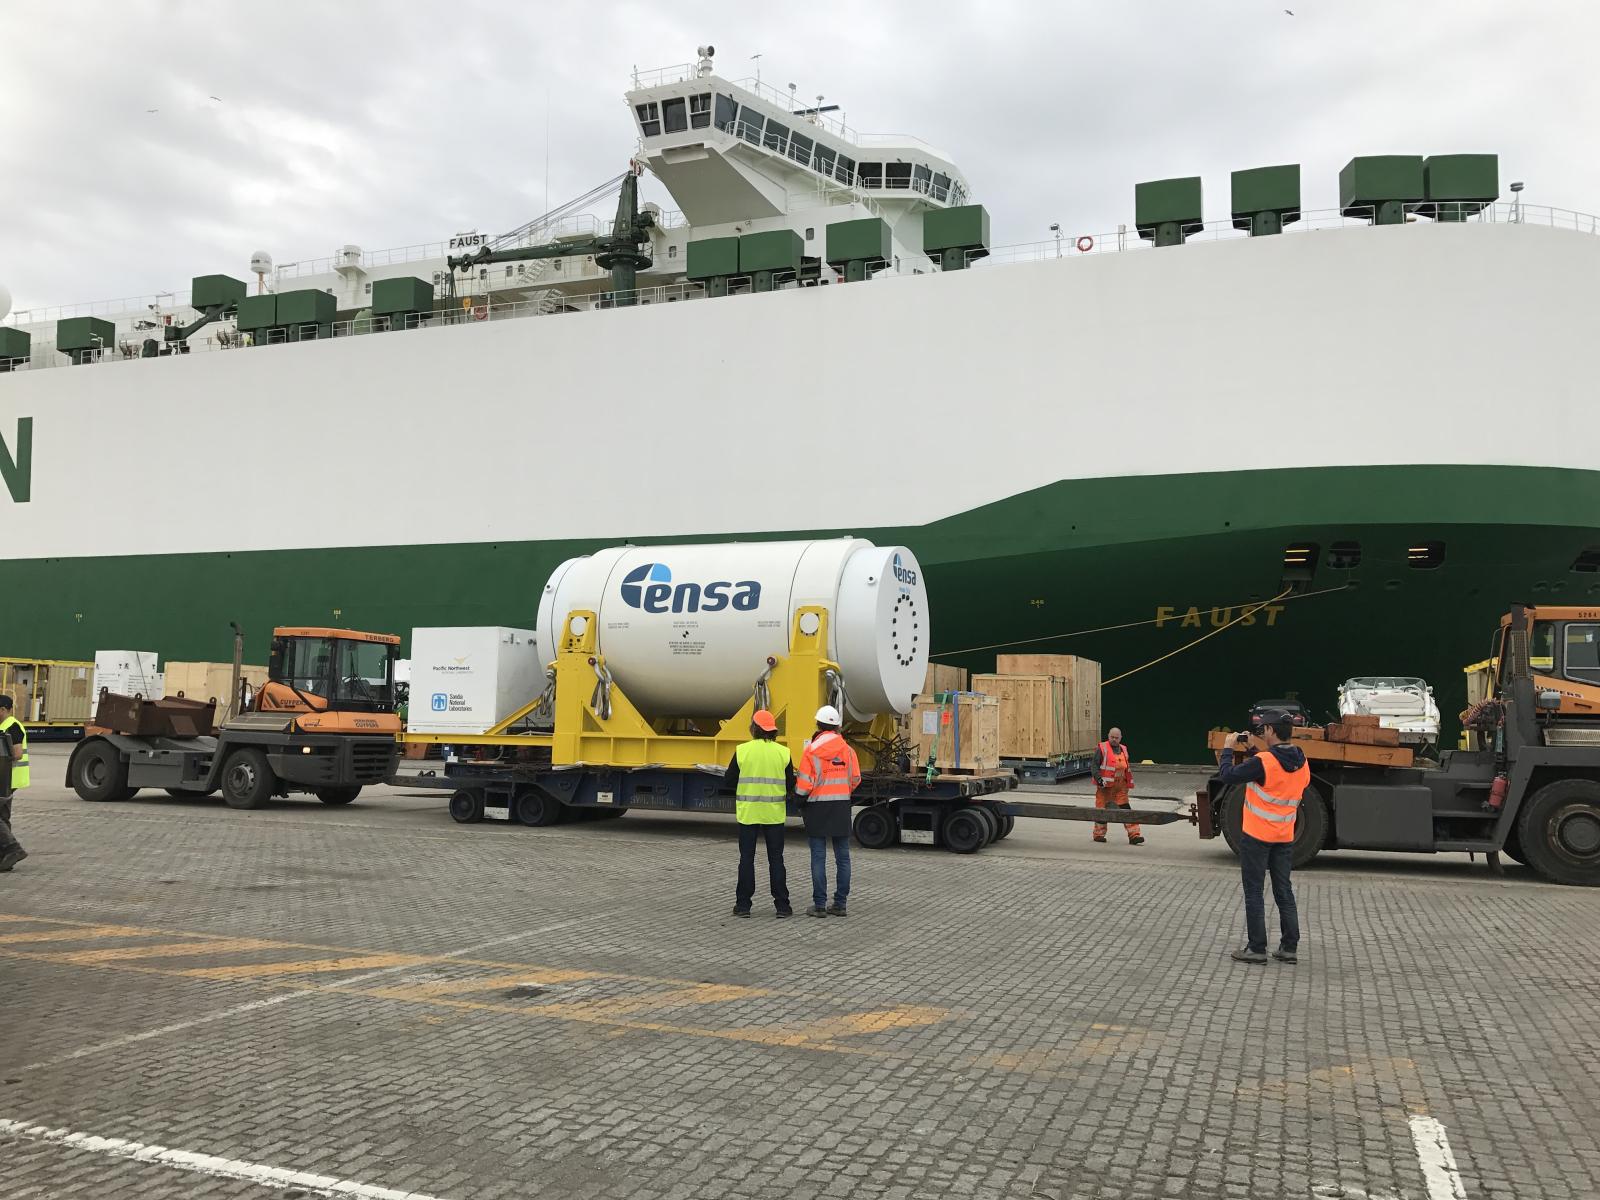 A large white cylinder sits on a yellow platform, waiting to be lifted by crane onto a ship.